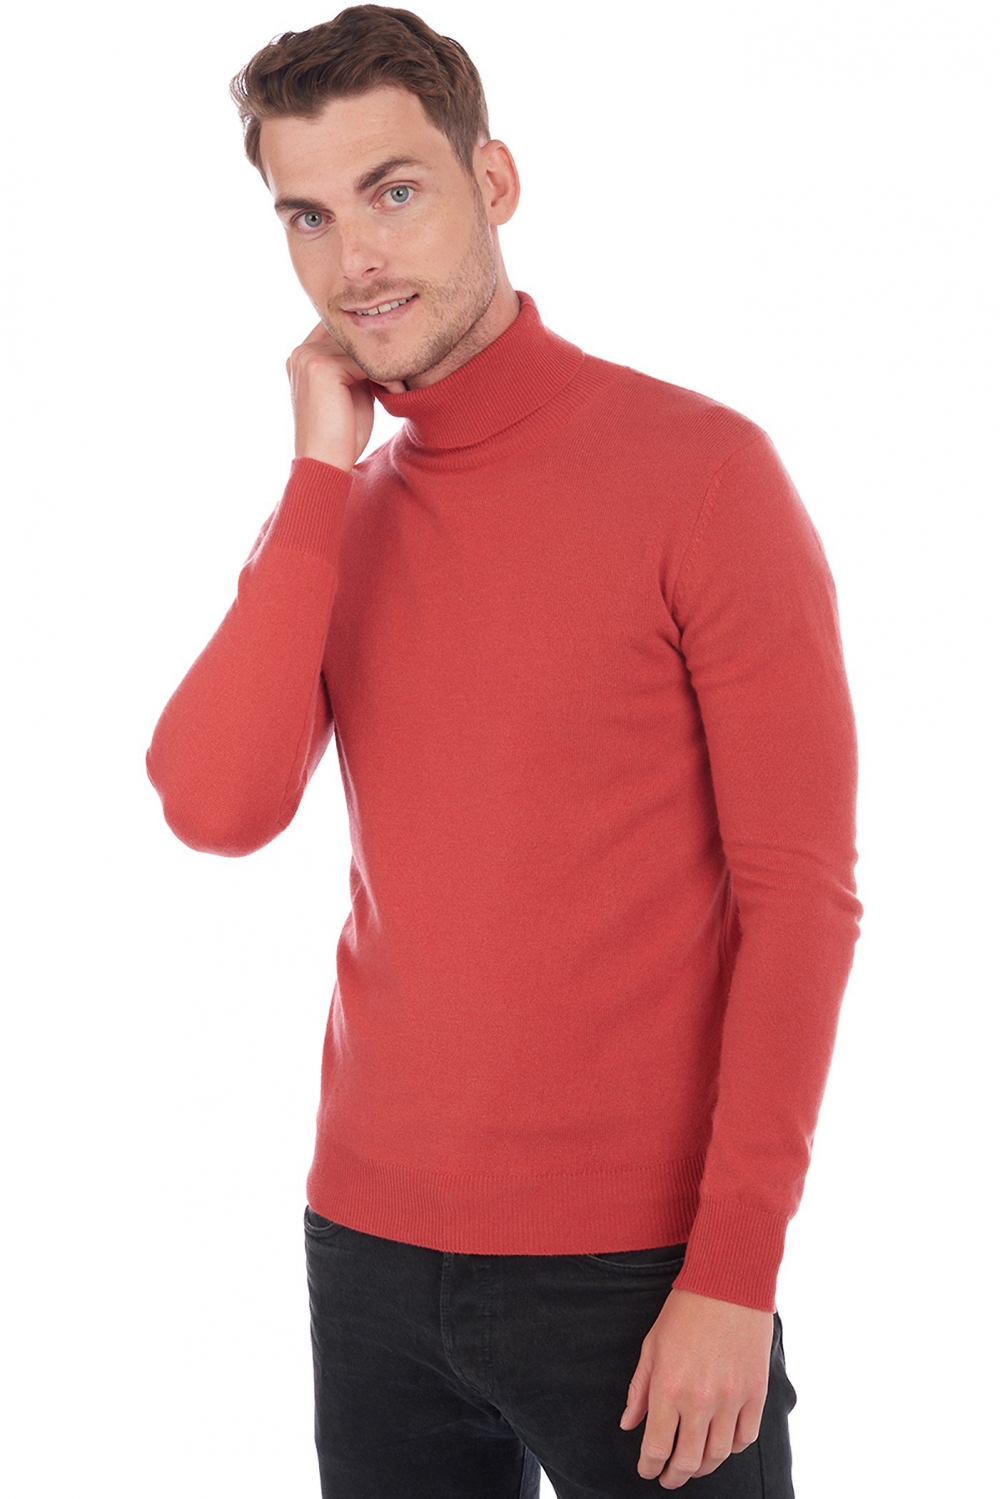 Cashmere men low prices tarry first quite coral m